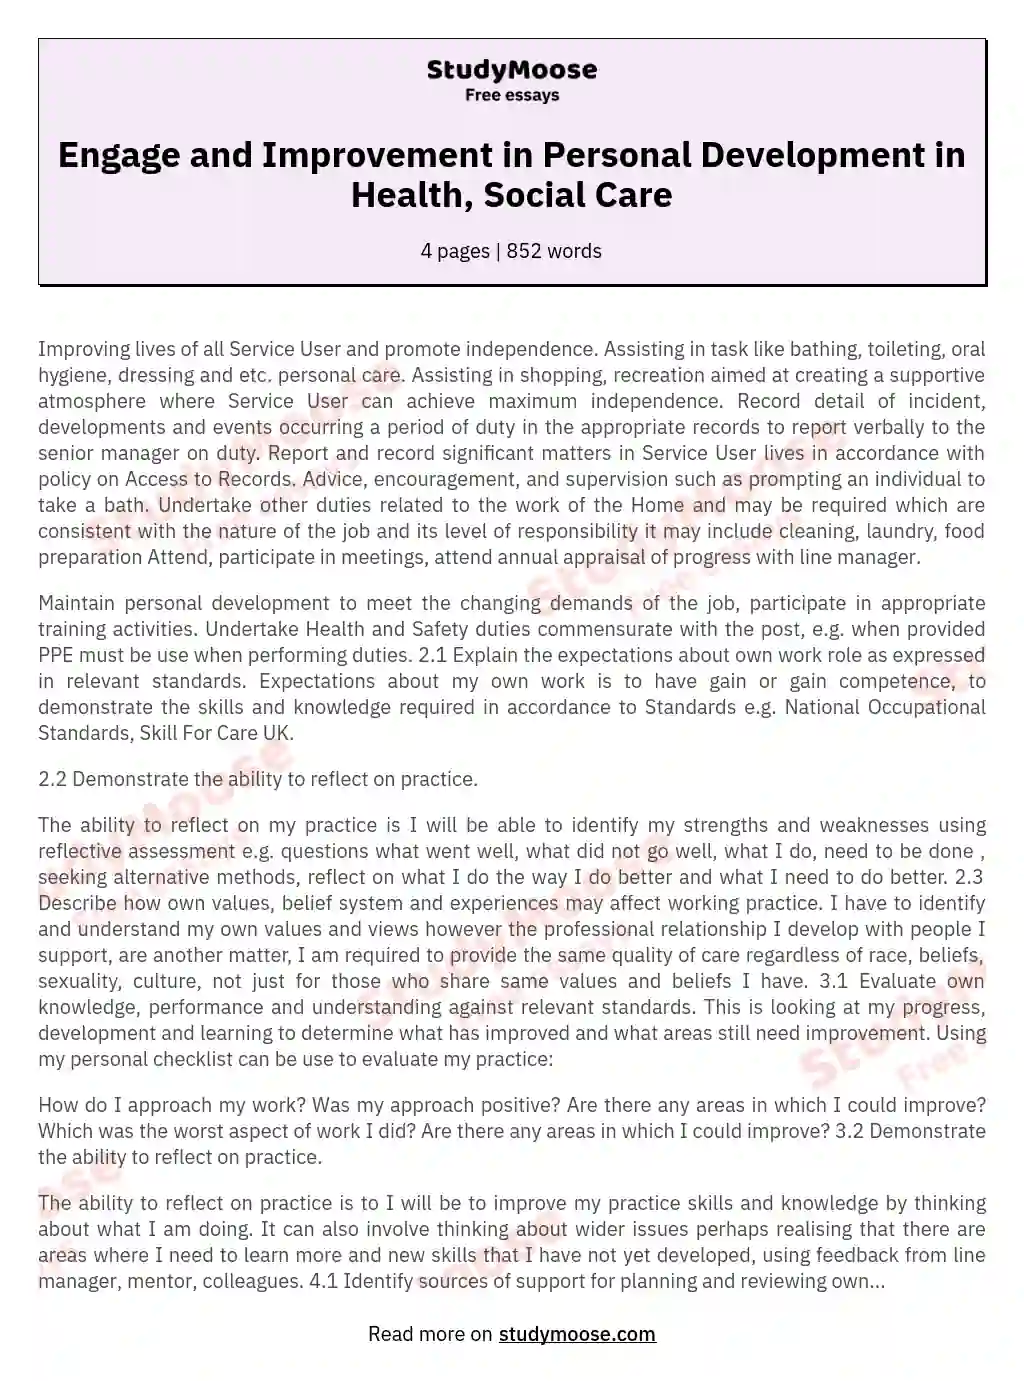 Engage and Improvement in Personal Development in Health, Social Care